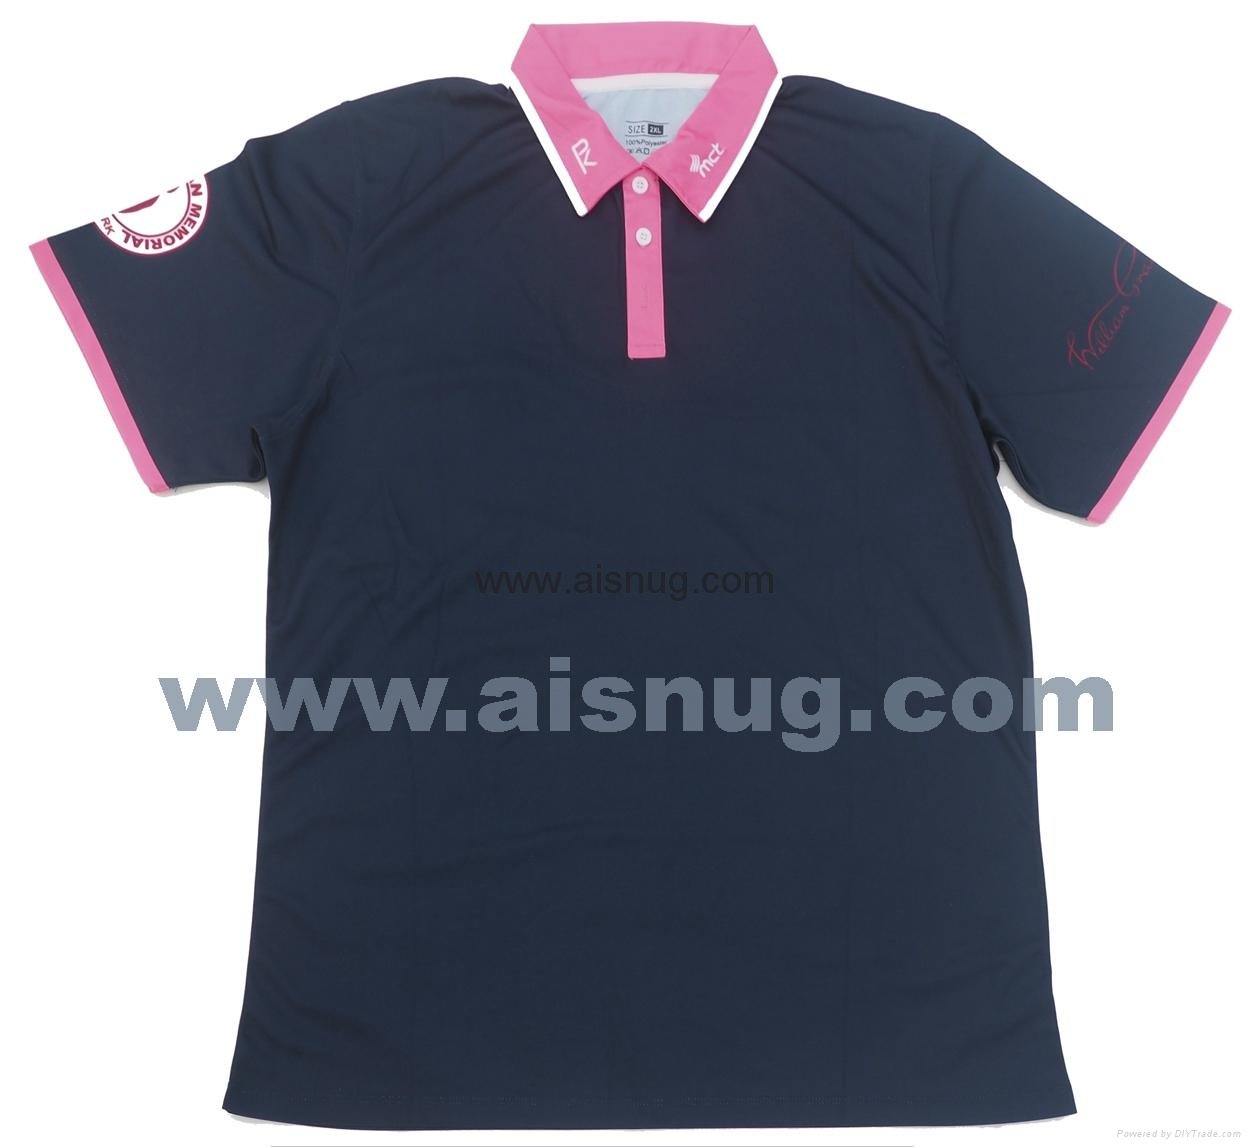 Embroidery patch printed custom golf shirt